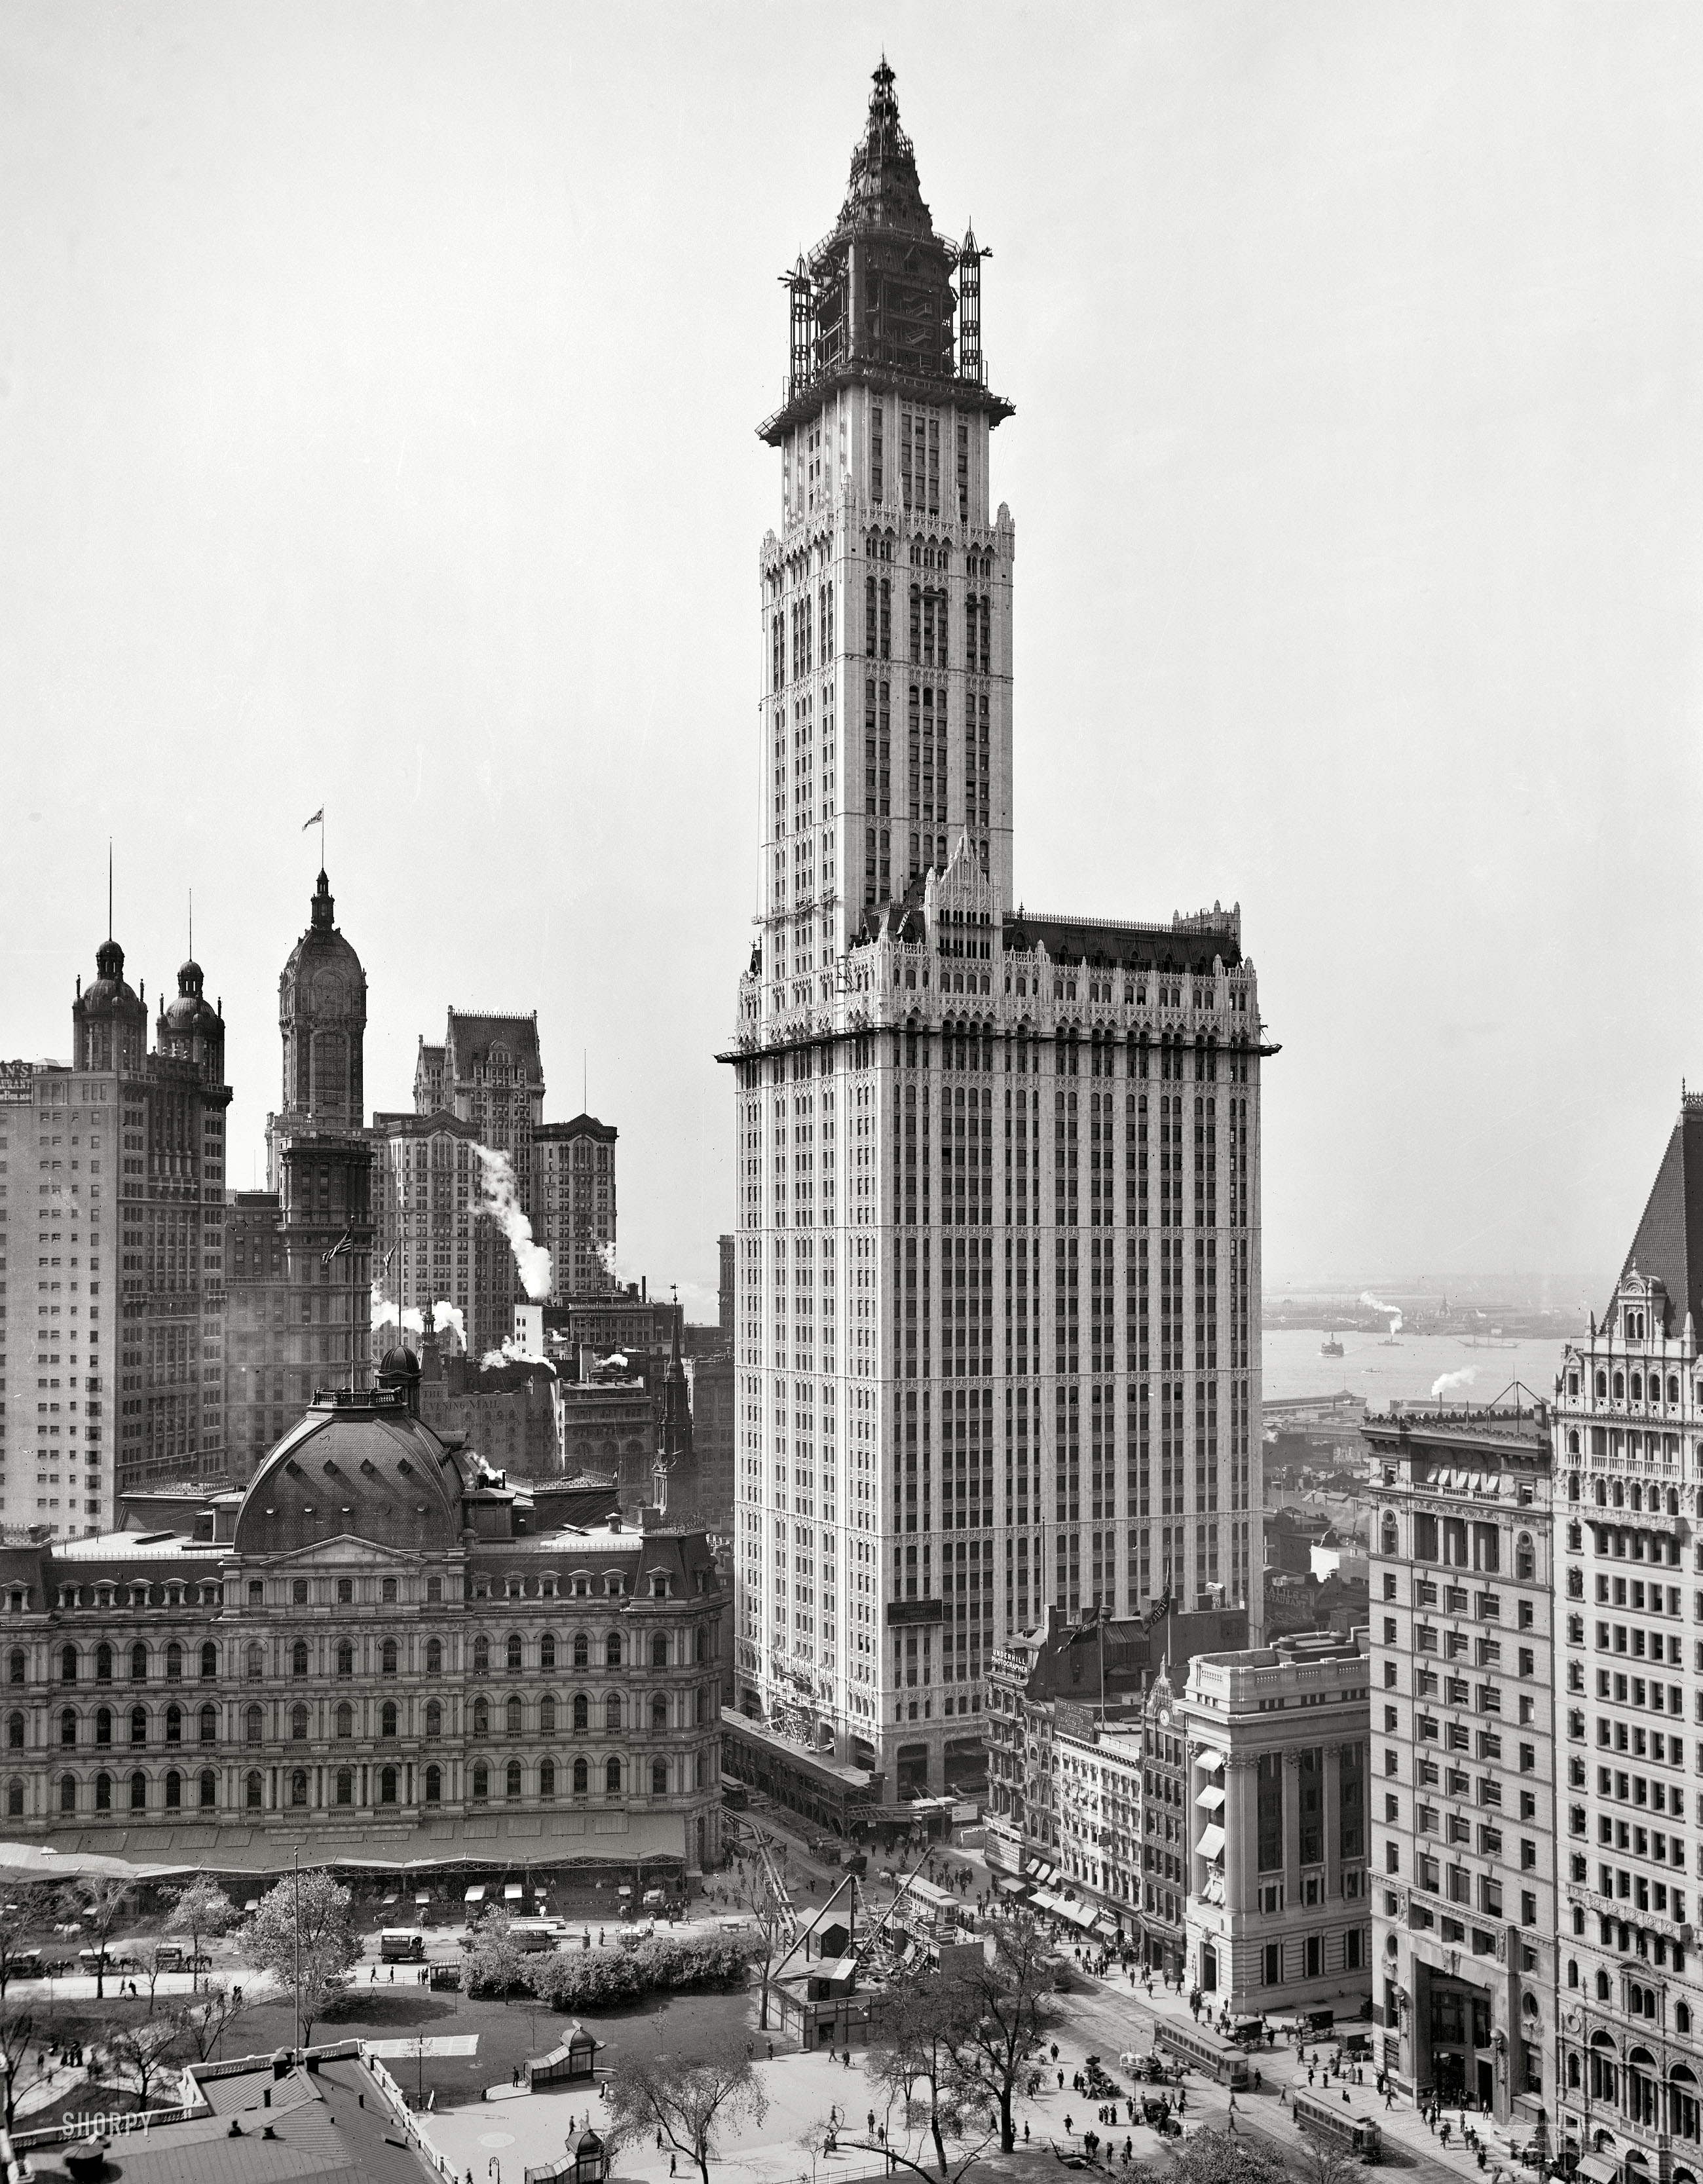 New York circa 1912. "Woolworth Building under construction." Other Manhattan landmarks on view include City Hall Park and its post office, seen here a few days ago, the Singer Building and the twin cupolas of the Park Row Building. 8x10 inch dry plate glass negative, Detroit Publishing Company. View full size.